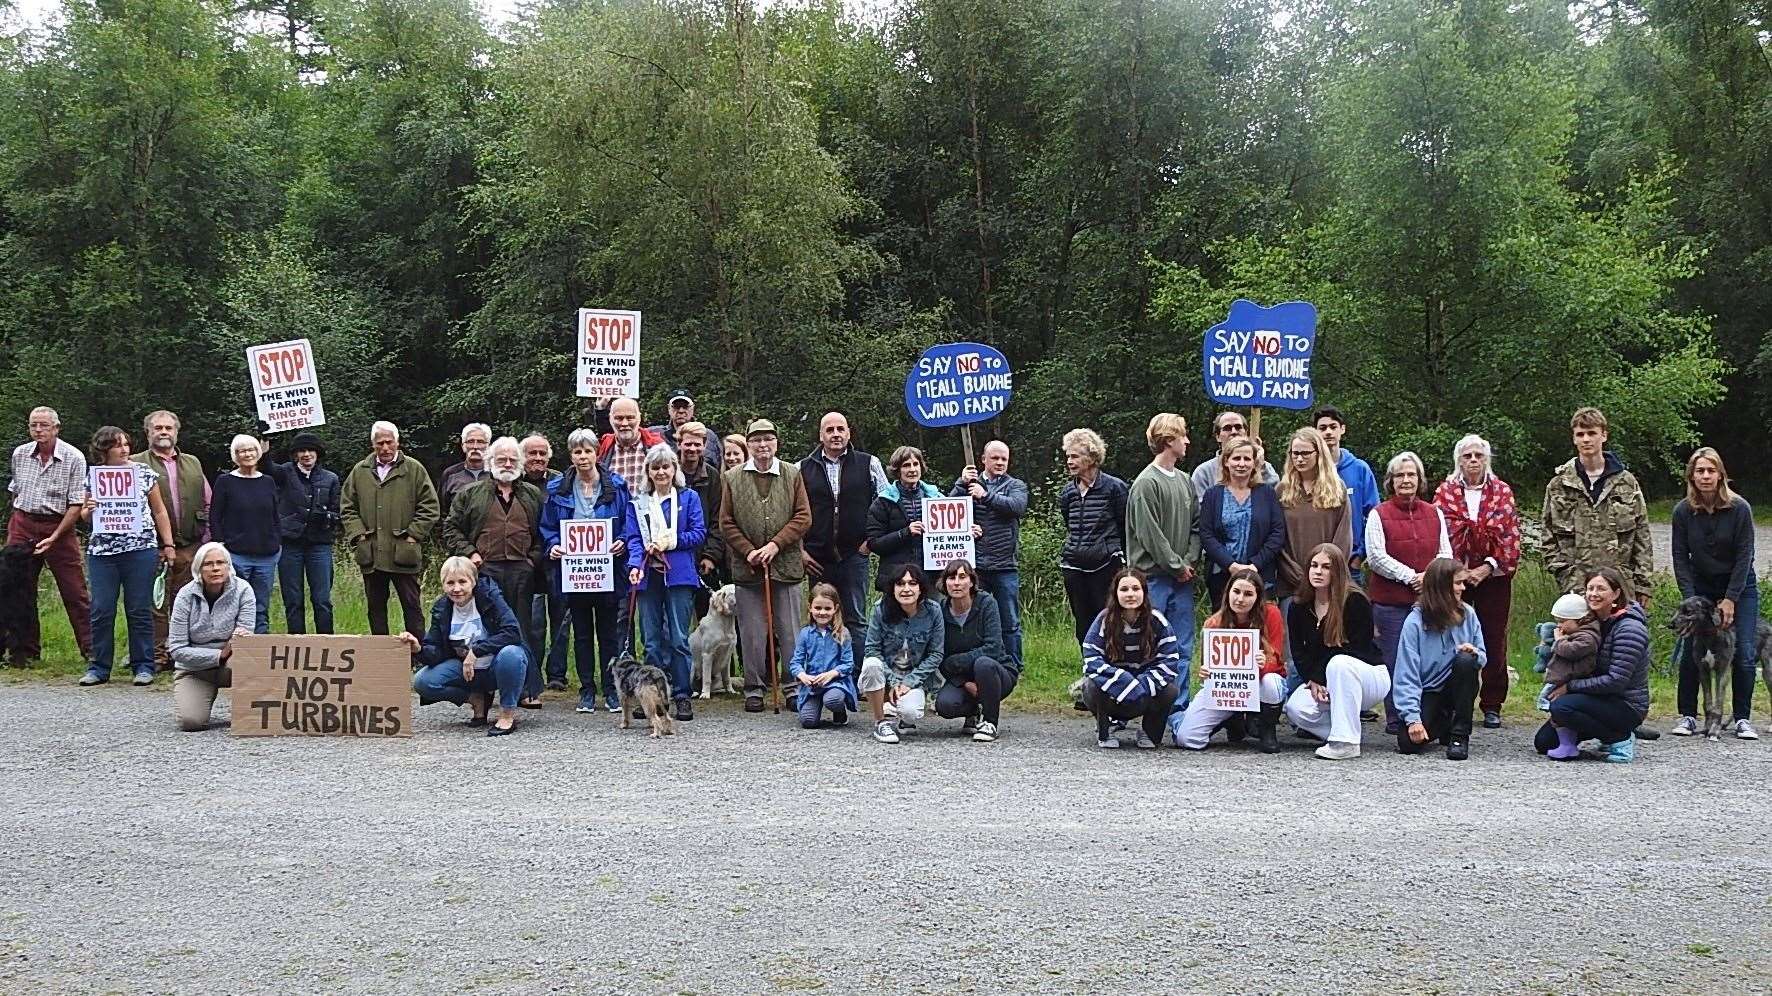 The protest held against the Meall Buidhe development.